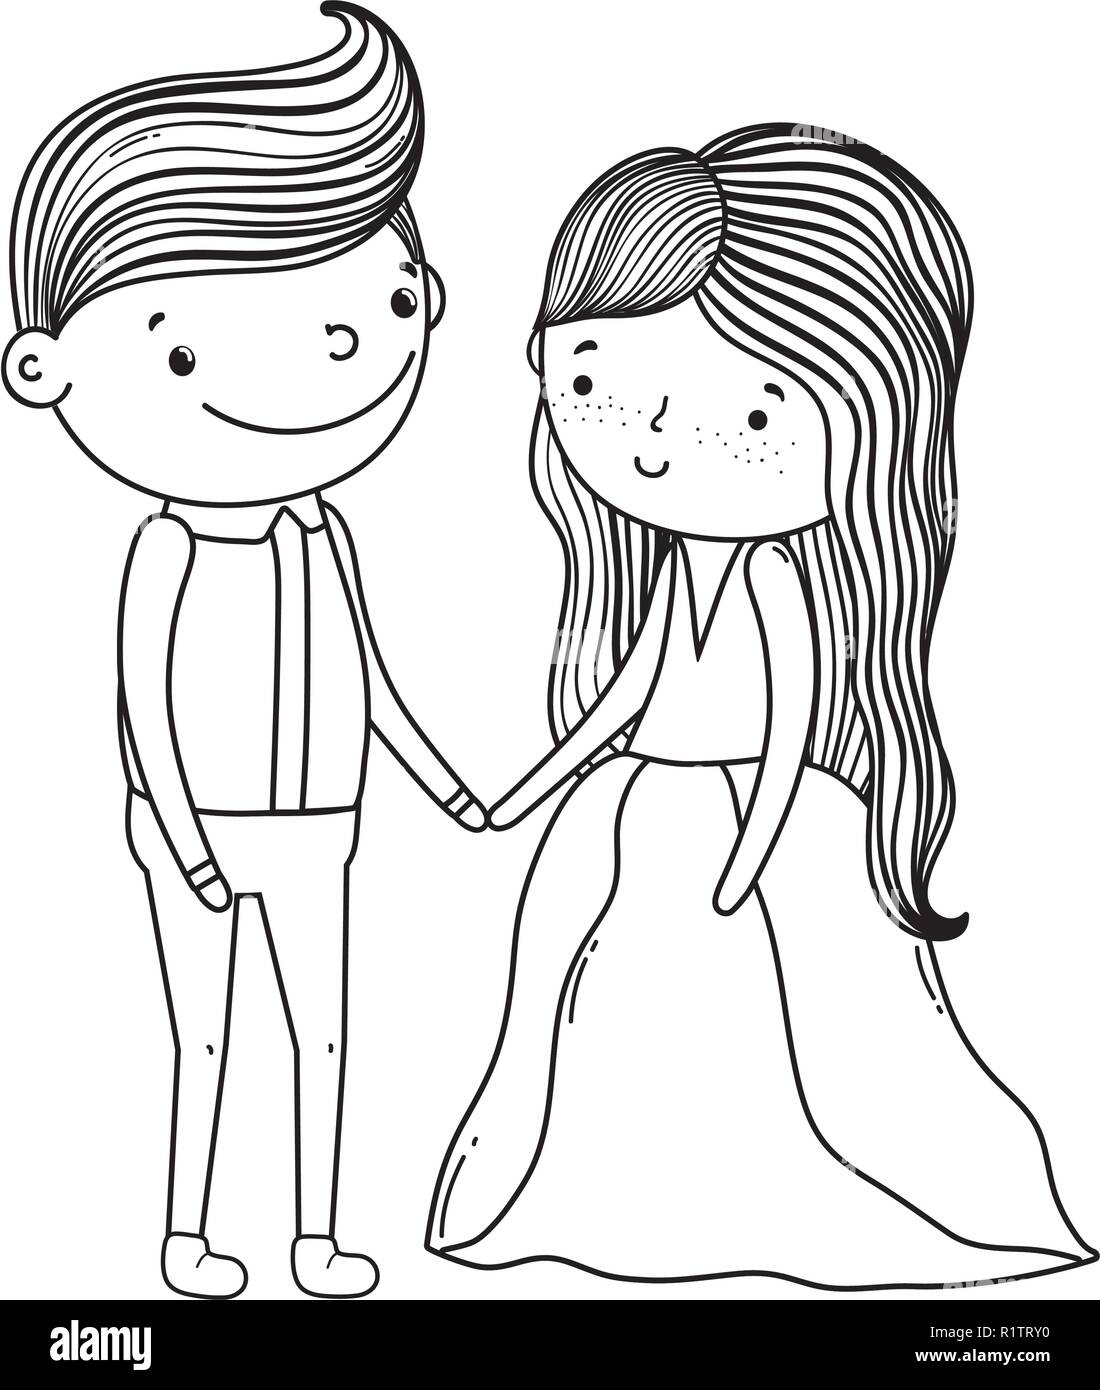 Illustration Cute Couple In Traditional High Resolution Stock